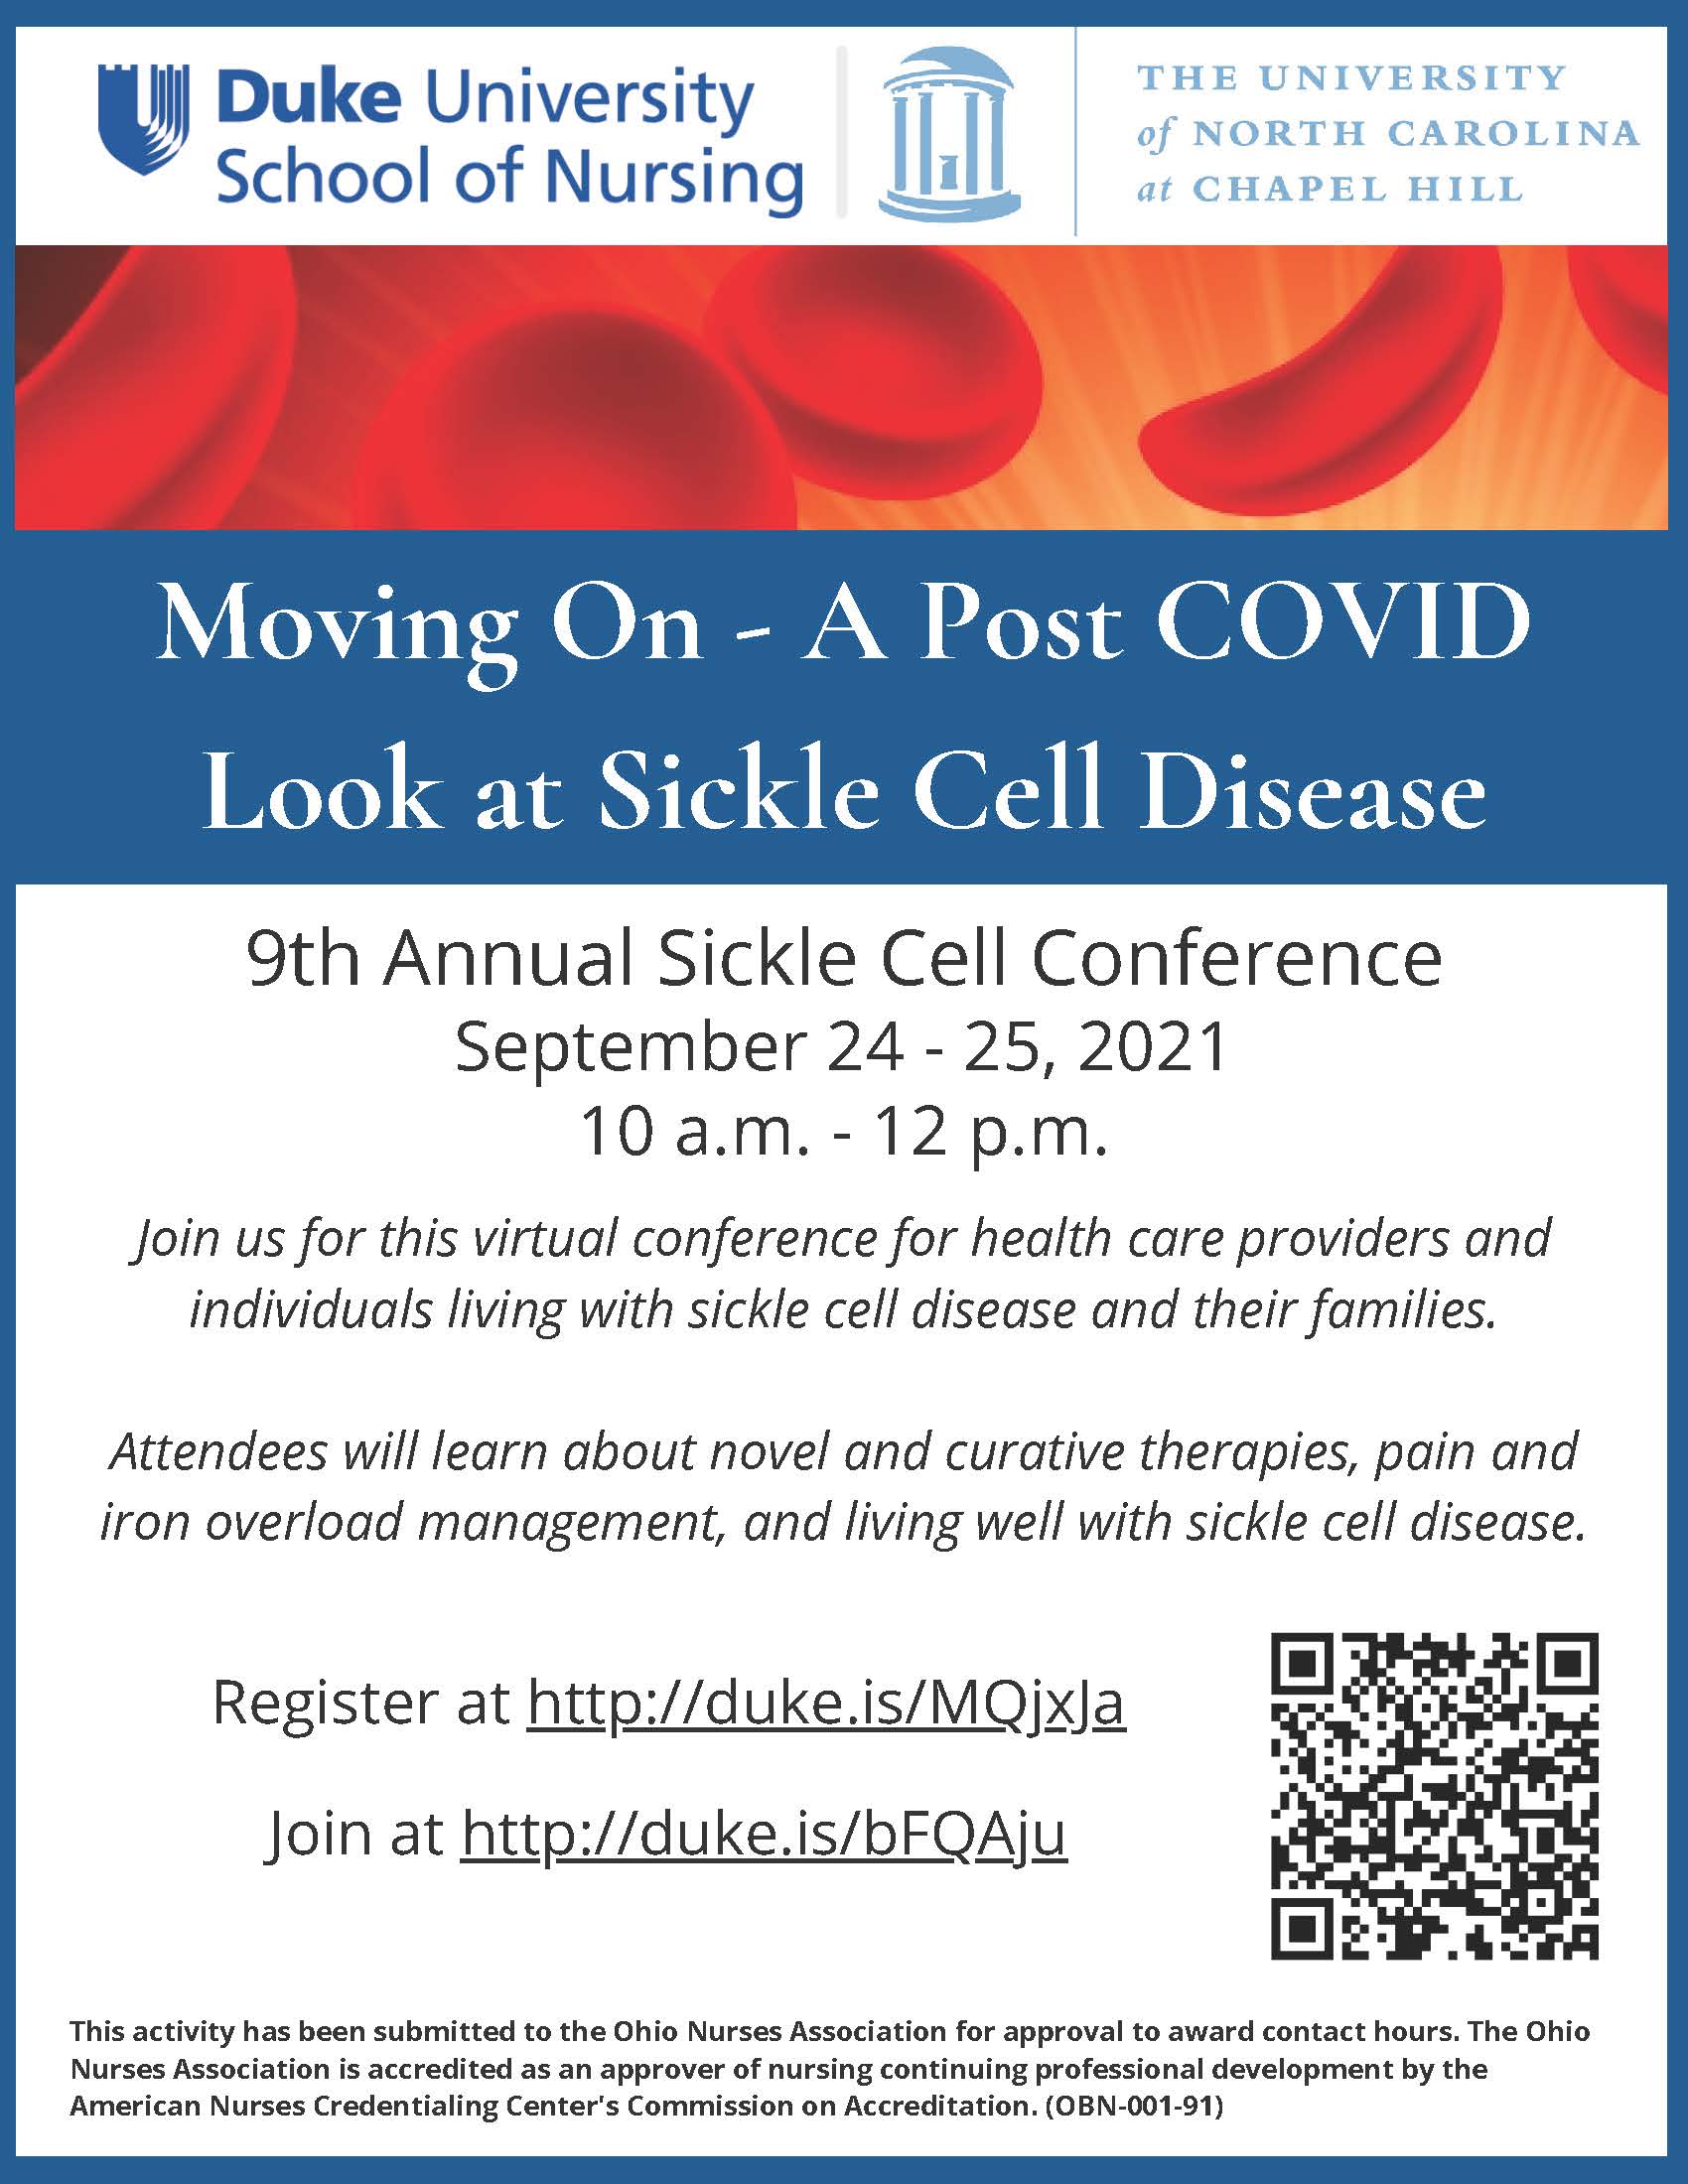 Sickle Cell Disease Conference Moving On A Post COVID Look at Sickle